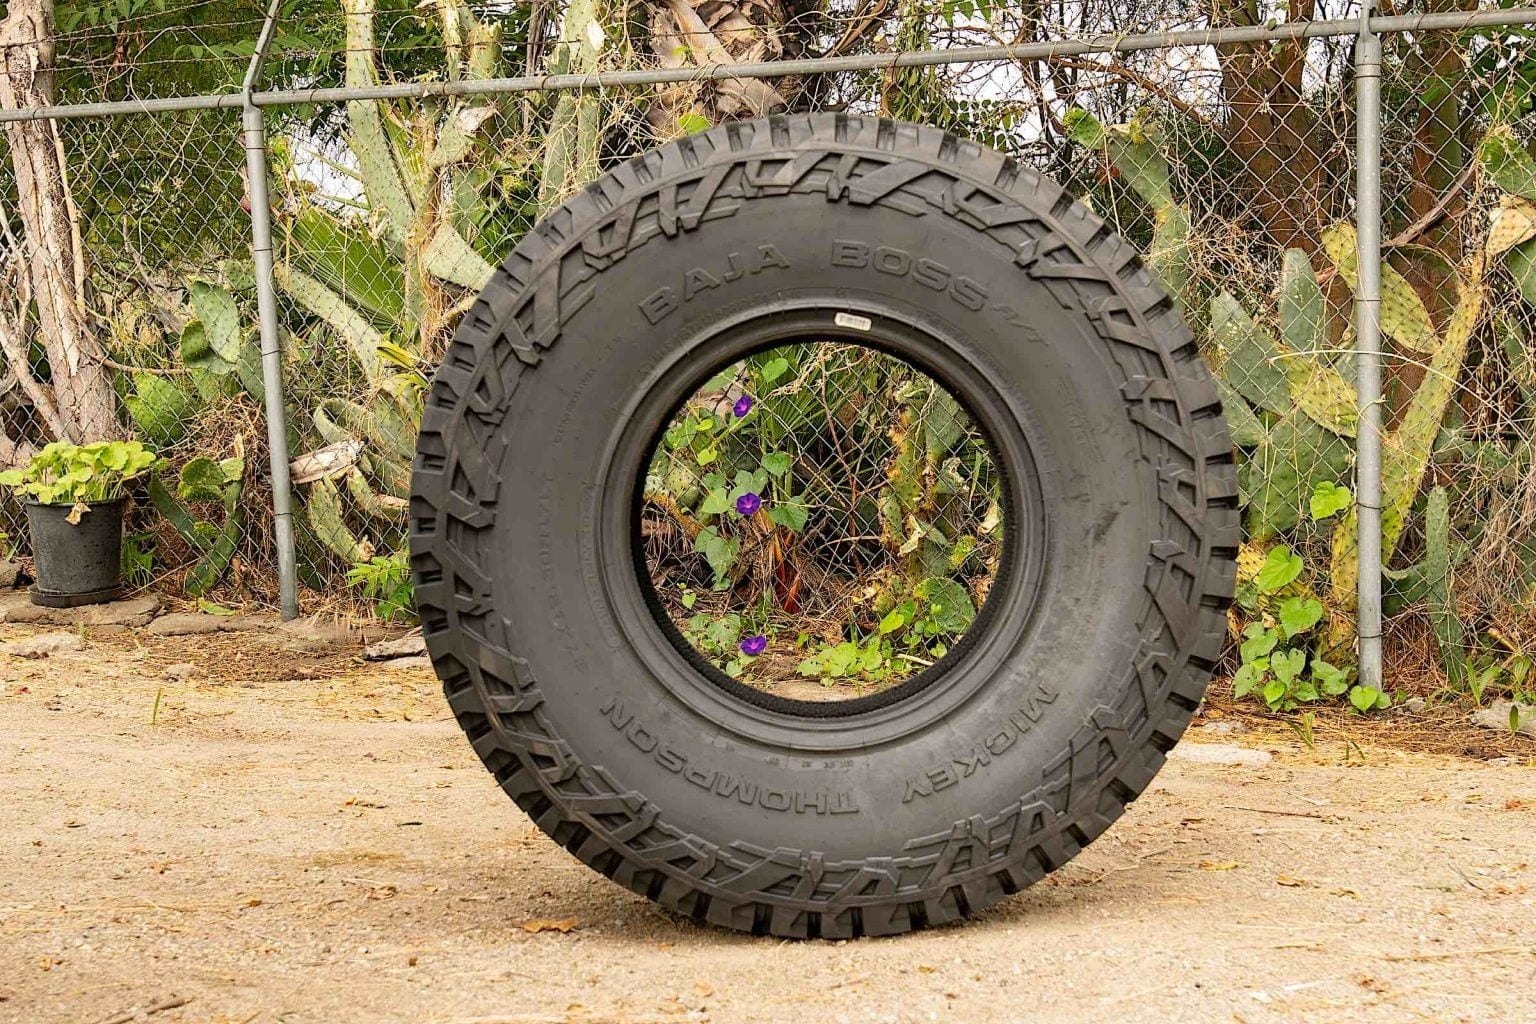 A Micky Thompson Baja Boss A/T Tire on the dirt.